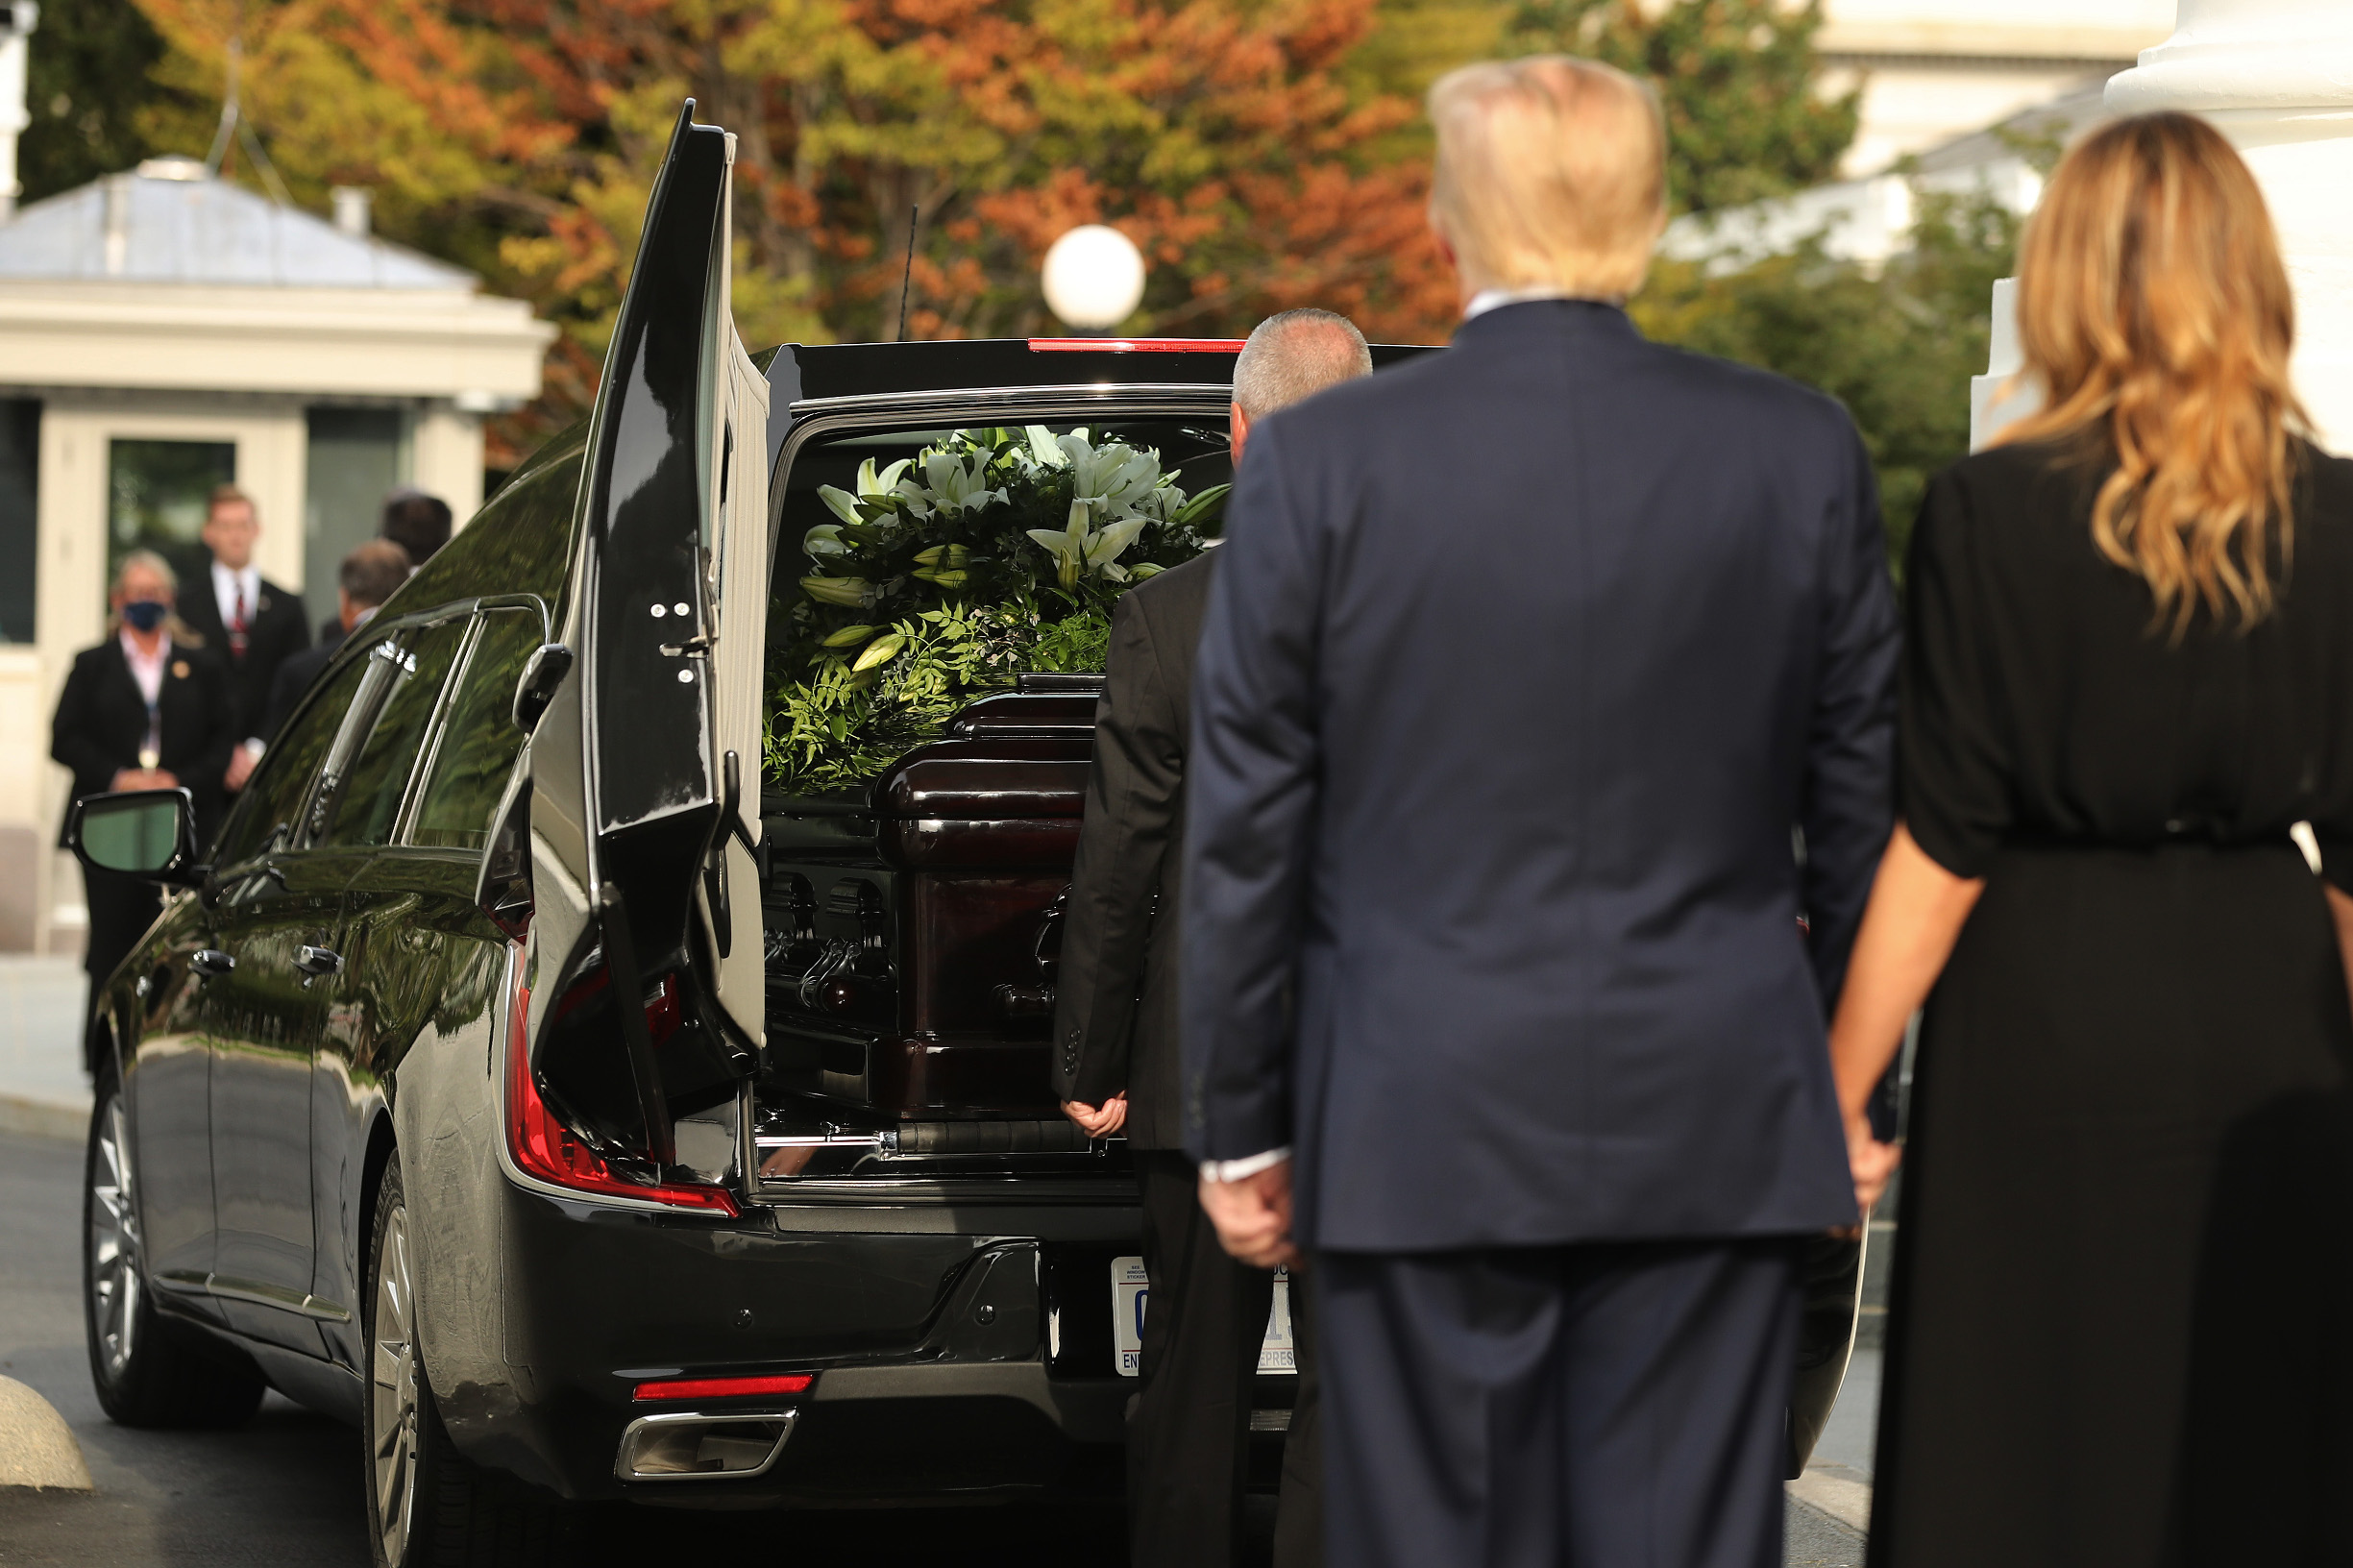 WASHINGTON, DC - AUGUST 21: U.S. President Donald Trump and first lady Melania Trump look on as Robert Trump’s casket is loaded into a hearse at the North Portico of the White House following his funeral service on August 21, 2020 in Washington, DC. Robert Trump passed away on August 15 at the age of 71. In a statement, President Trump wrote, “He was not just my brother, he was my best friend.